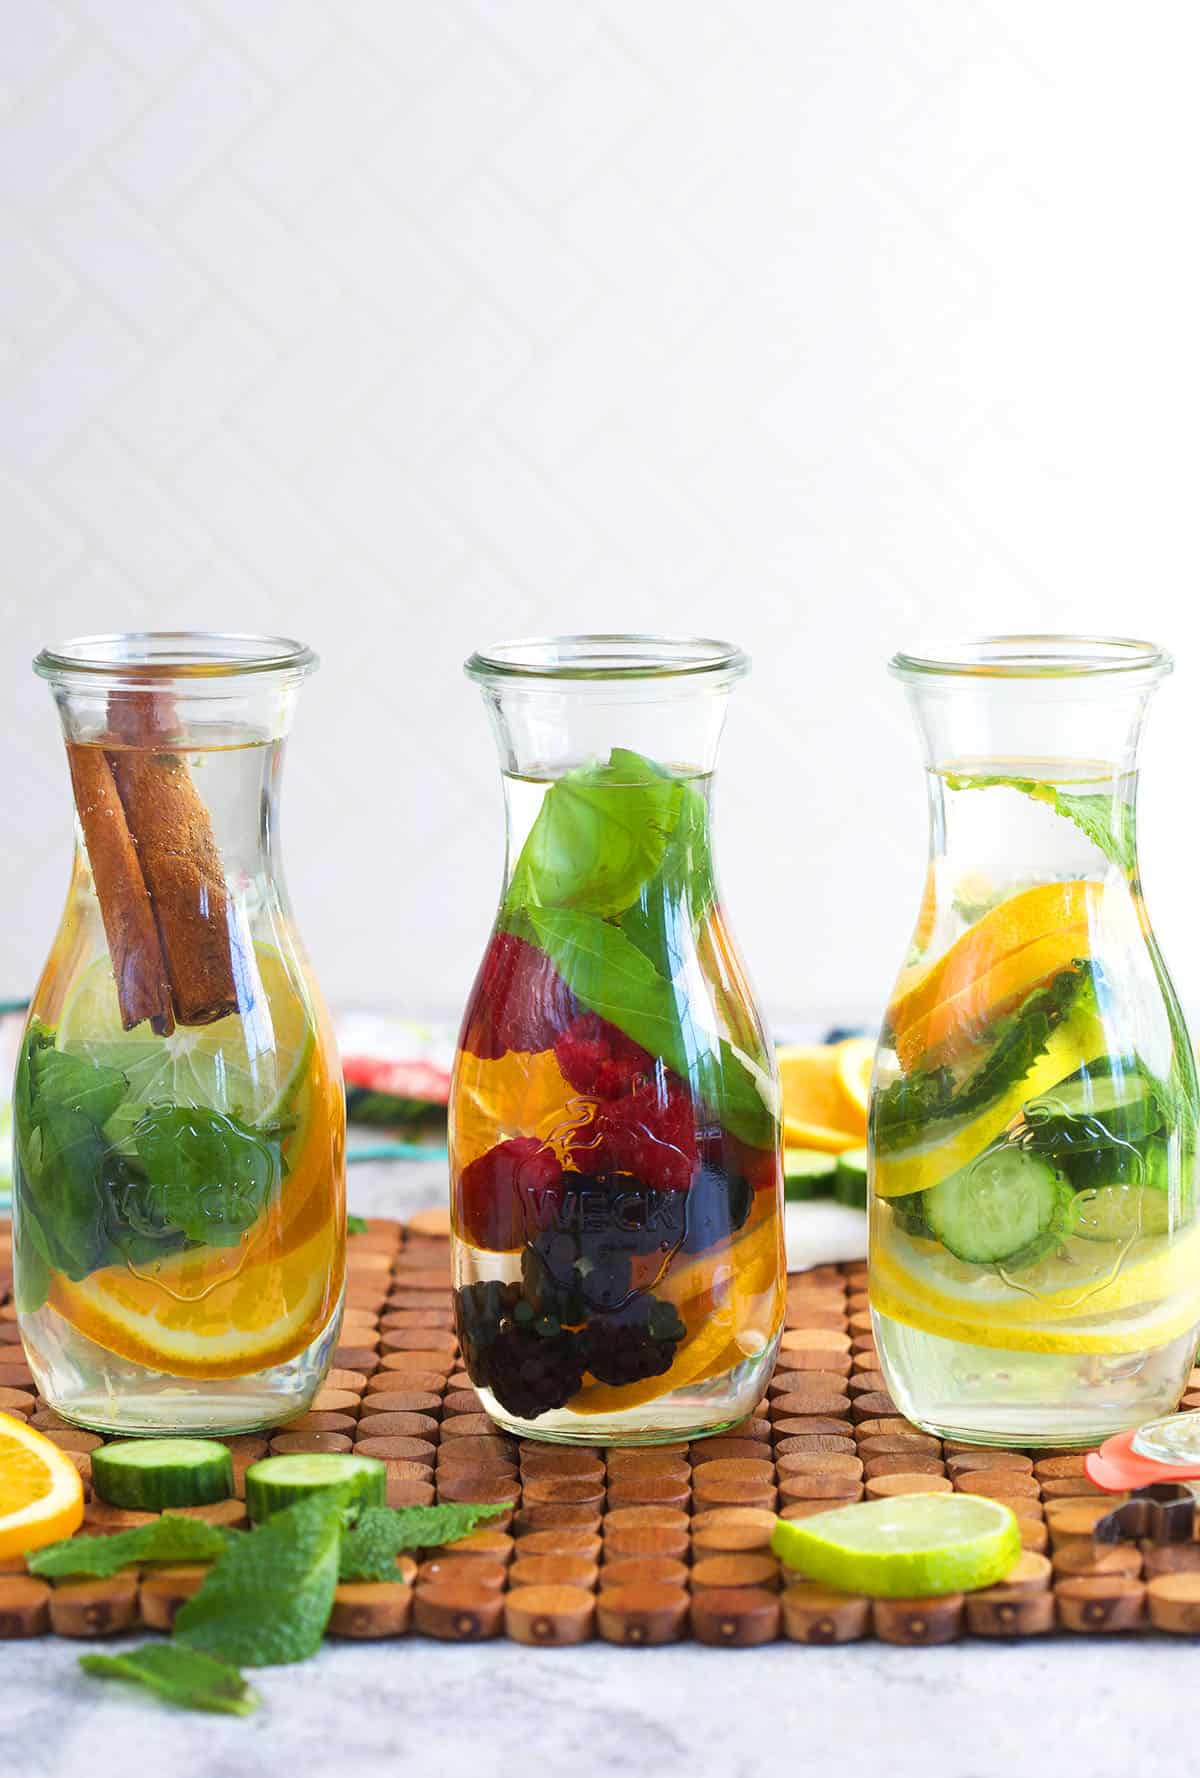 three bottles of infused water with a mix of fruit, vegetables and herbs in them.